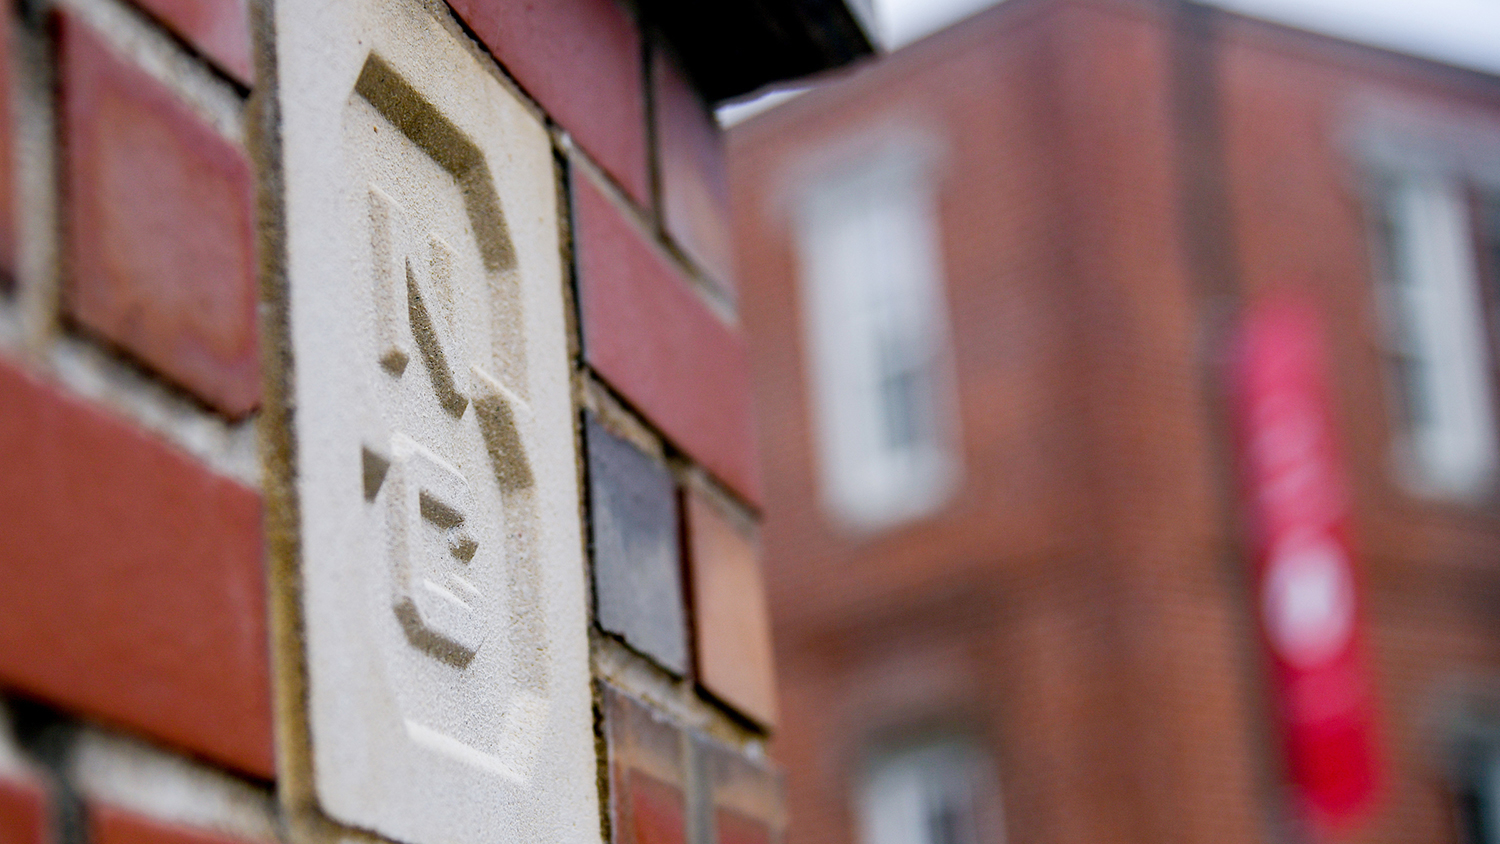 Close-up of block "S" that marks an entrance to main campus.